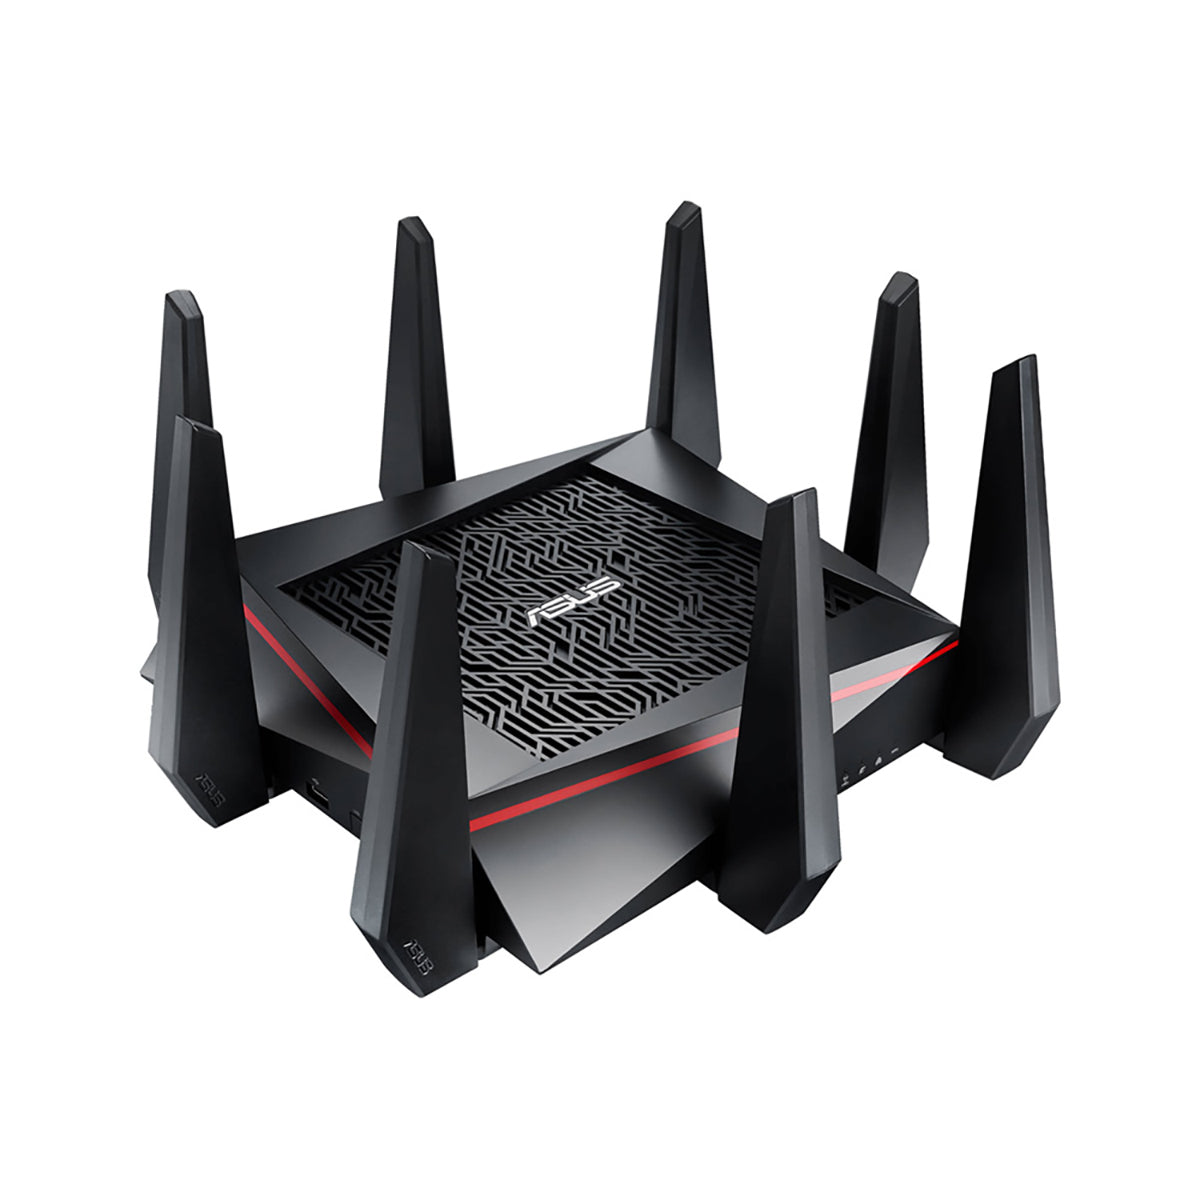 ROUTER ASUS TRI BAND MIMO 8 ANTENAS 5DBI AC5300 2.4GHZ-1000MBPS 2x5.0GHZ-2167MBPS GT-AC5300